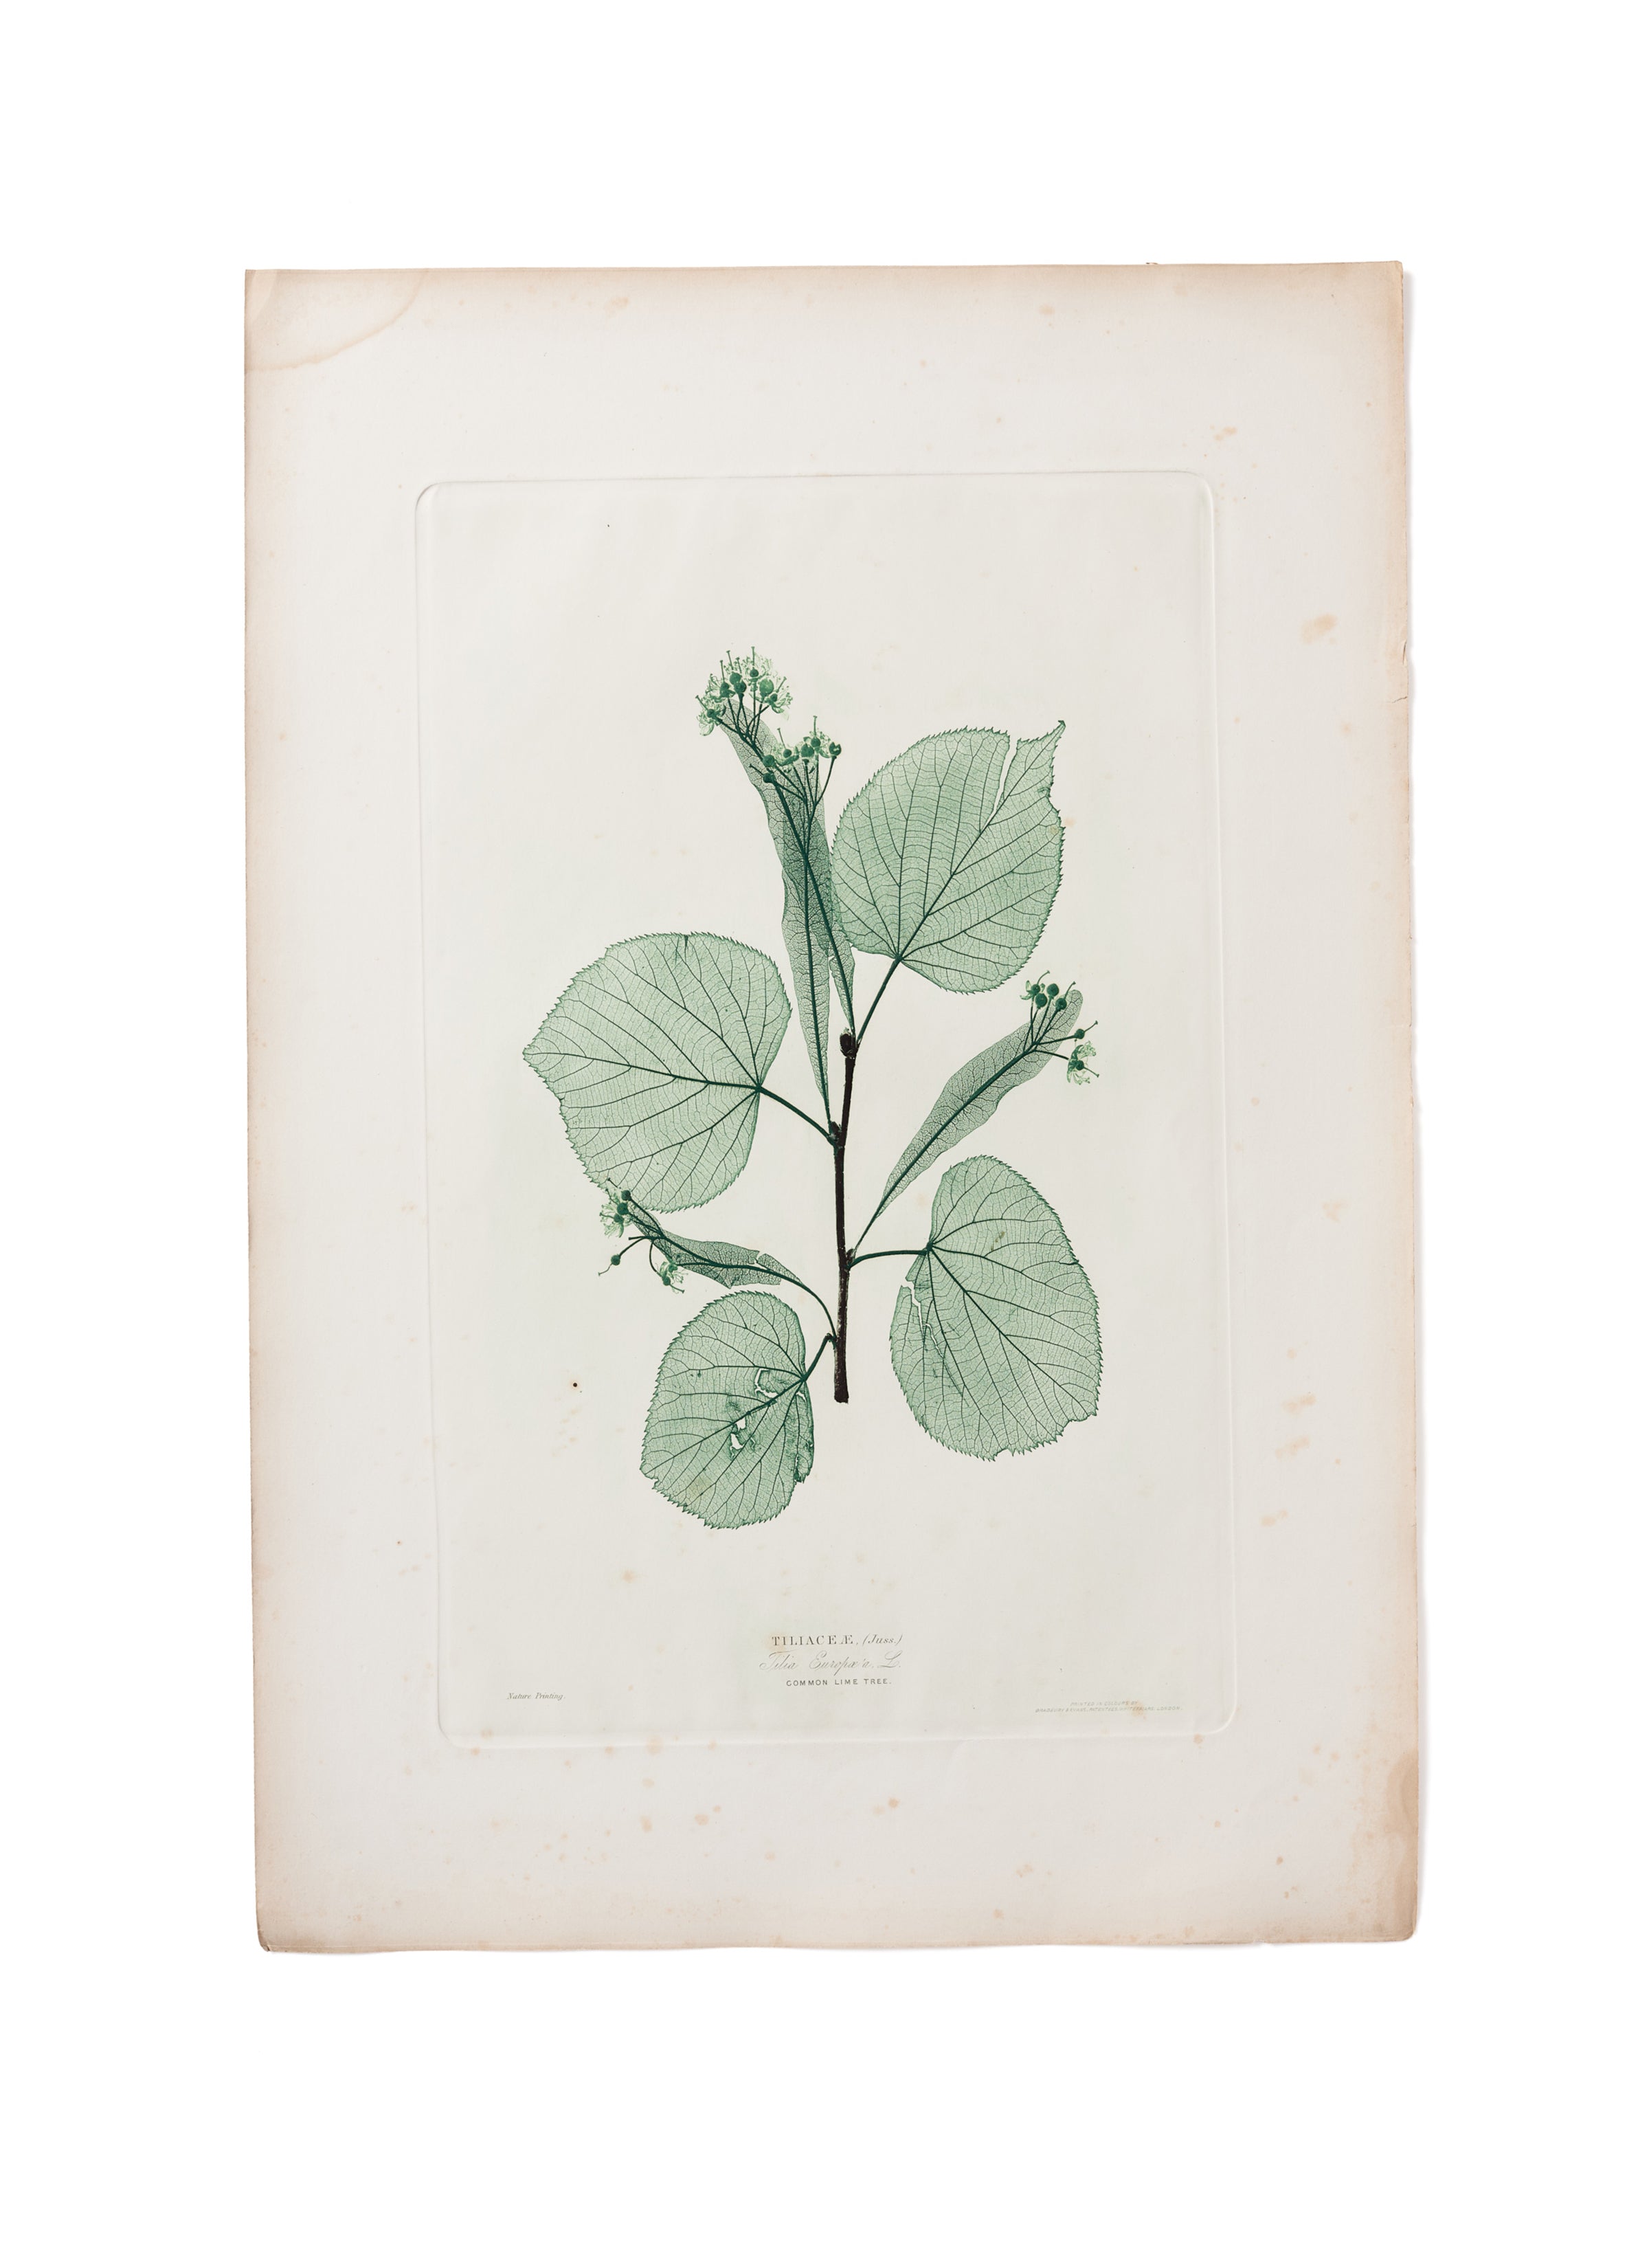 Tilia x vulgaris 4 leaves, printed in black and two shades of green.